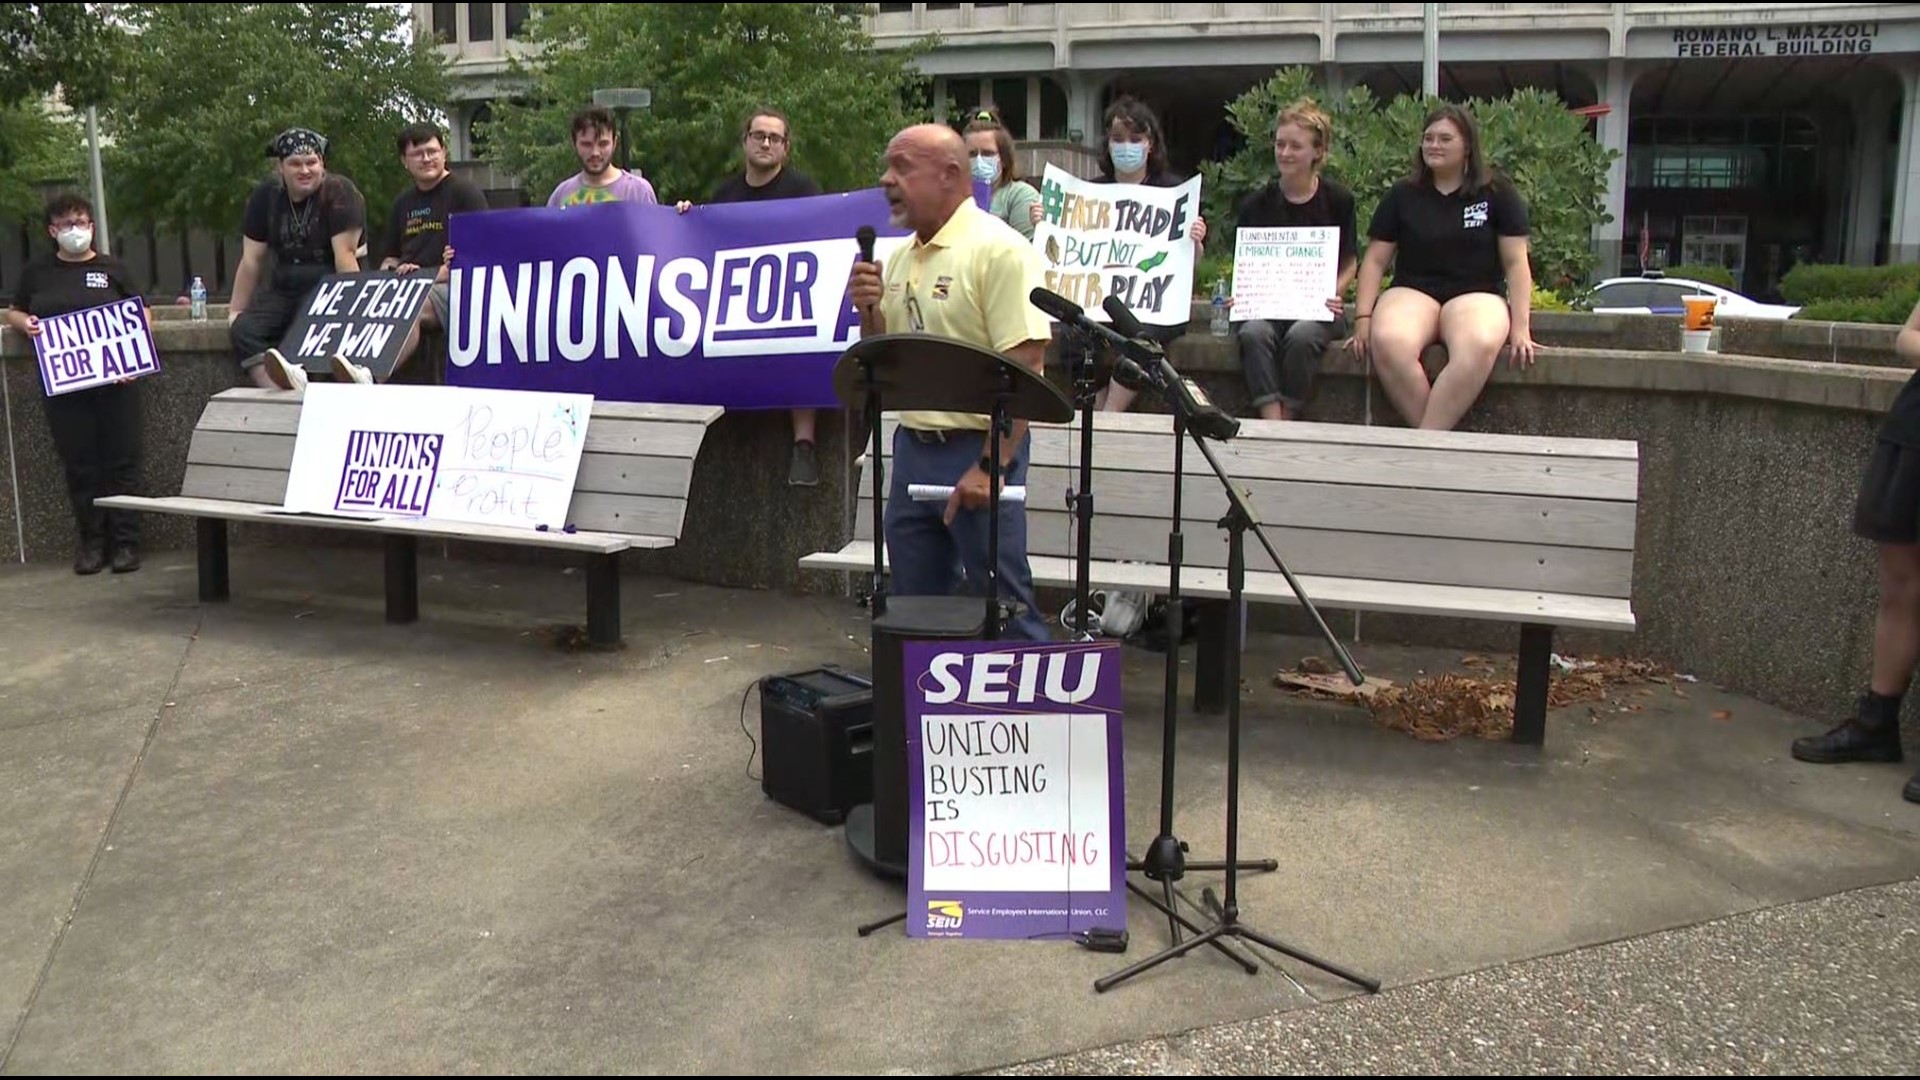 They announced it on their Twitter page Thursday, and it was the largest group to vote on unionizing in the metro in almost a decade according to union spokespeople.